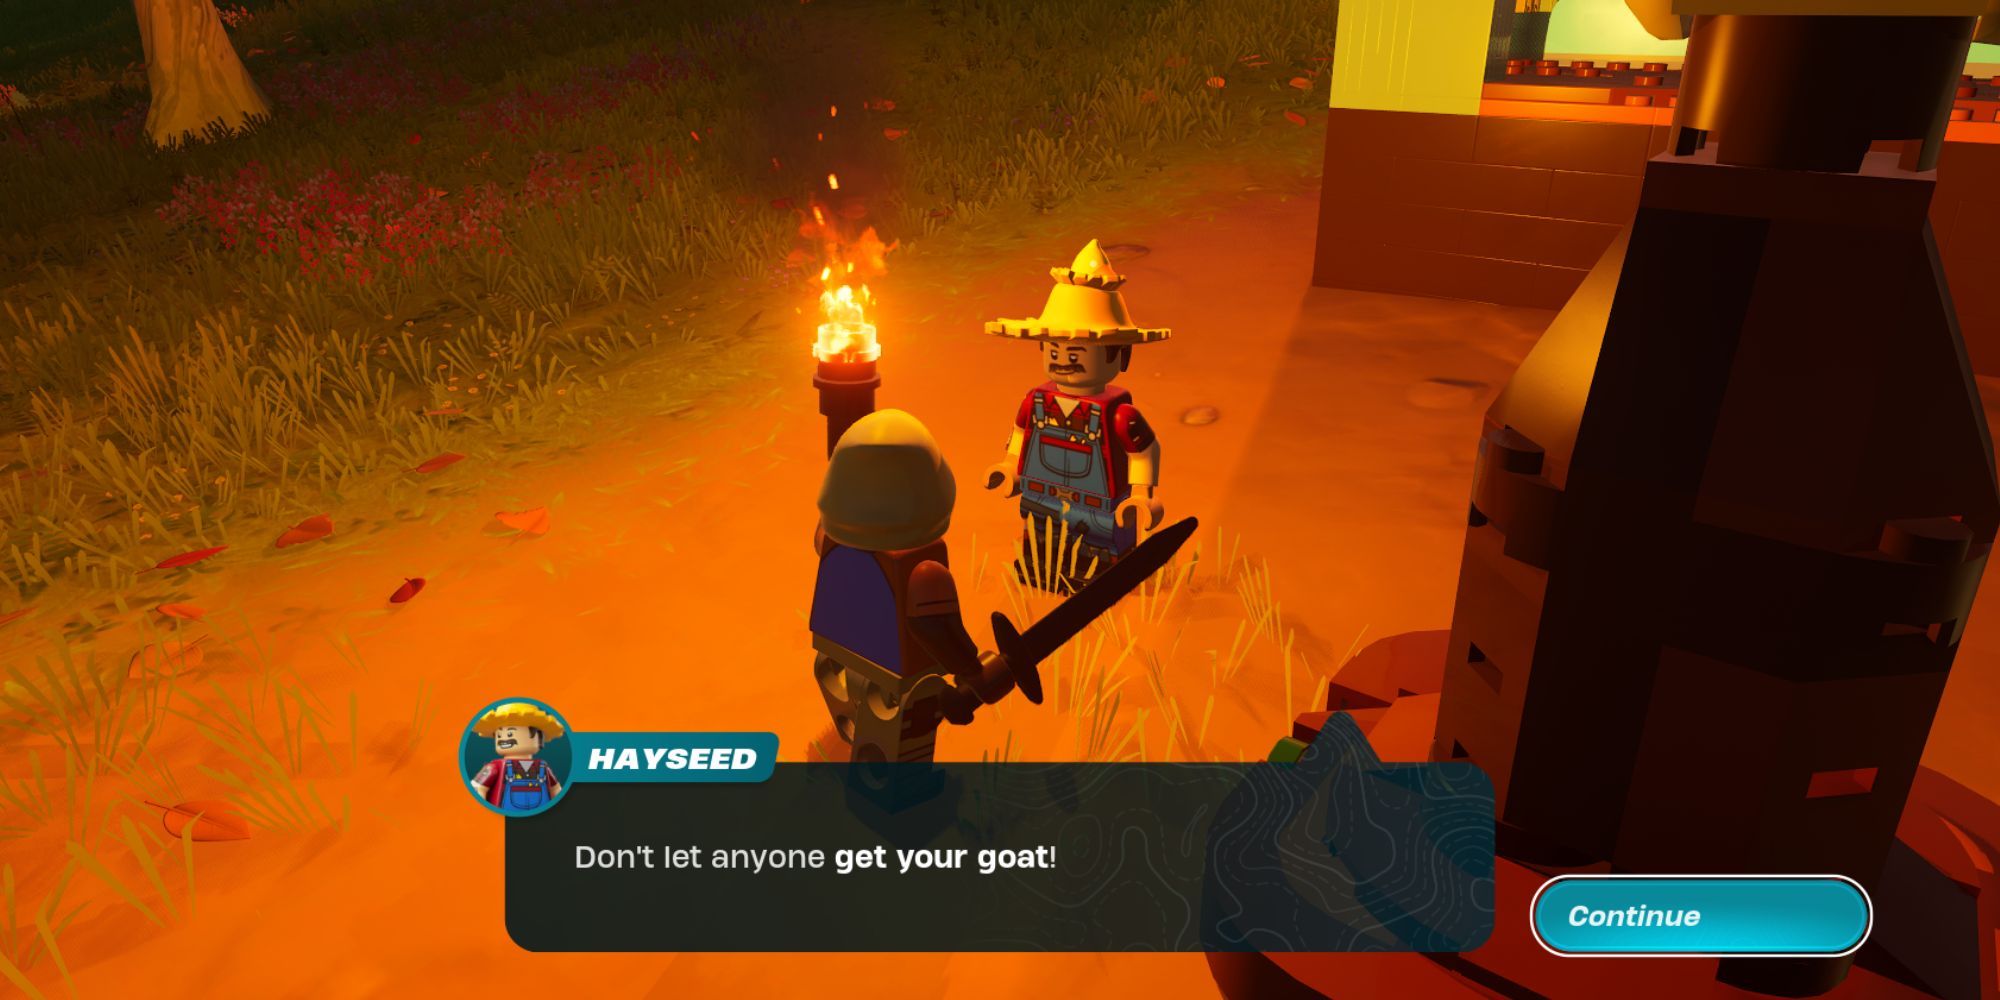 A dialogue with Hayseed, a farmer with a yellow, pointy straw hat on his head.